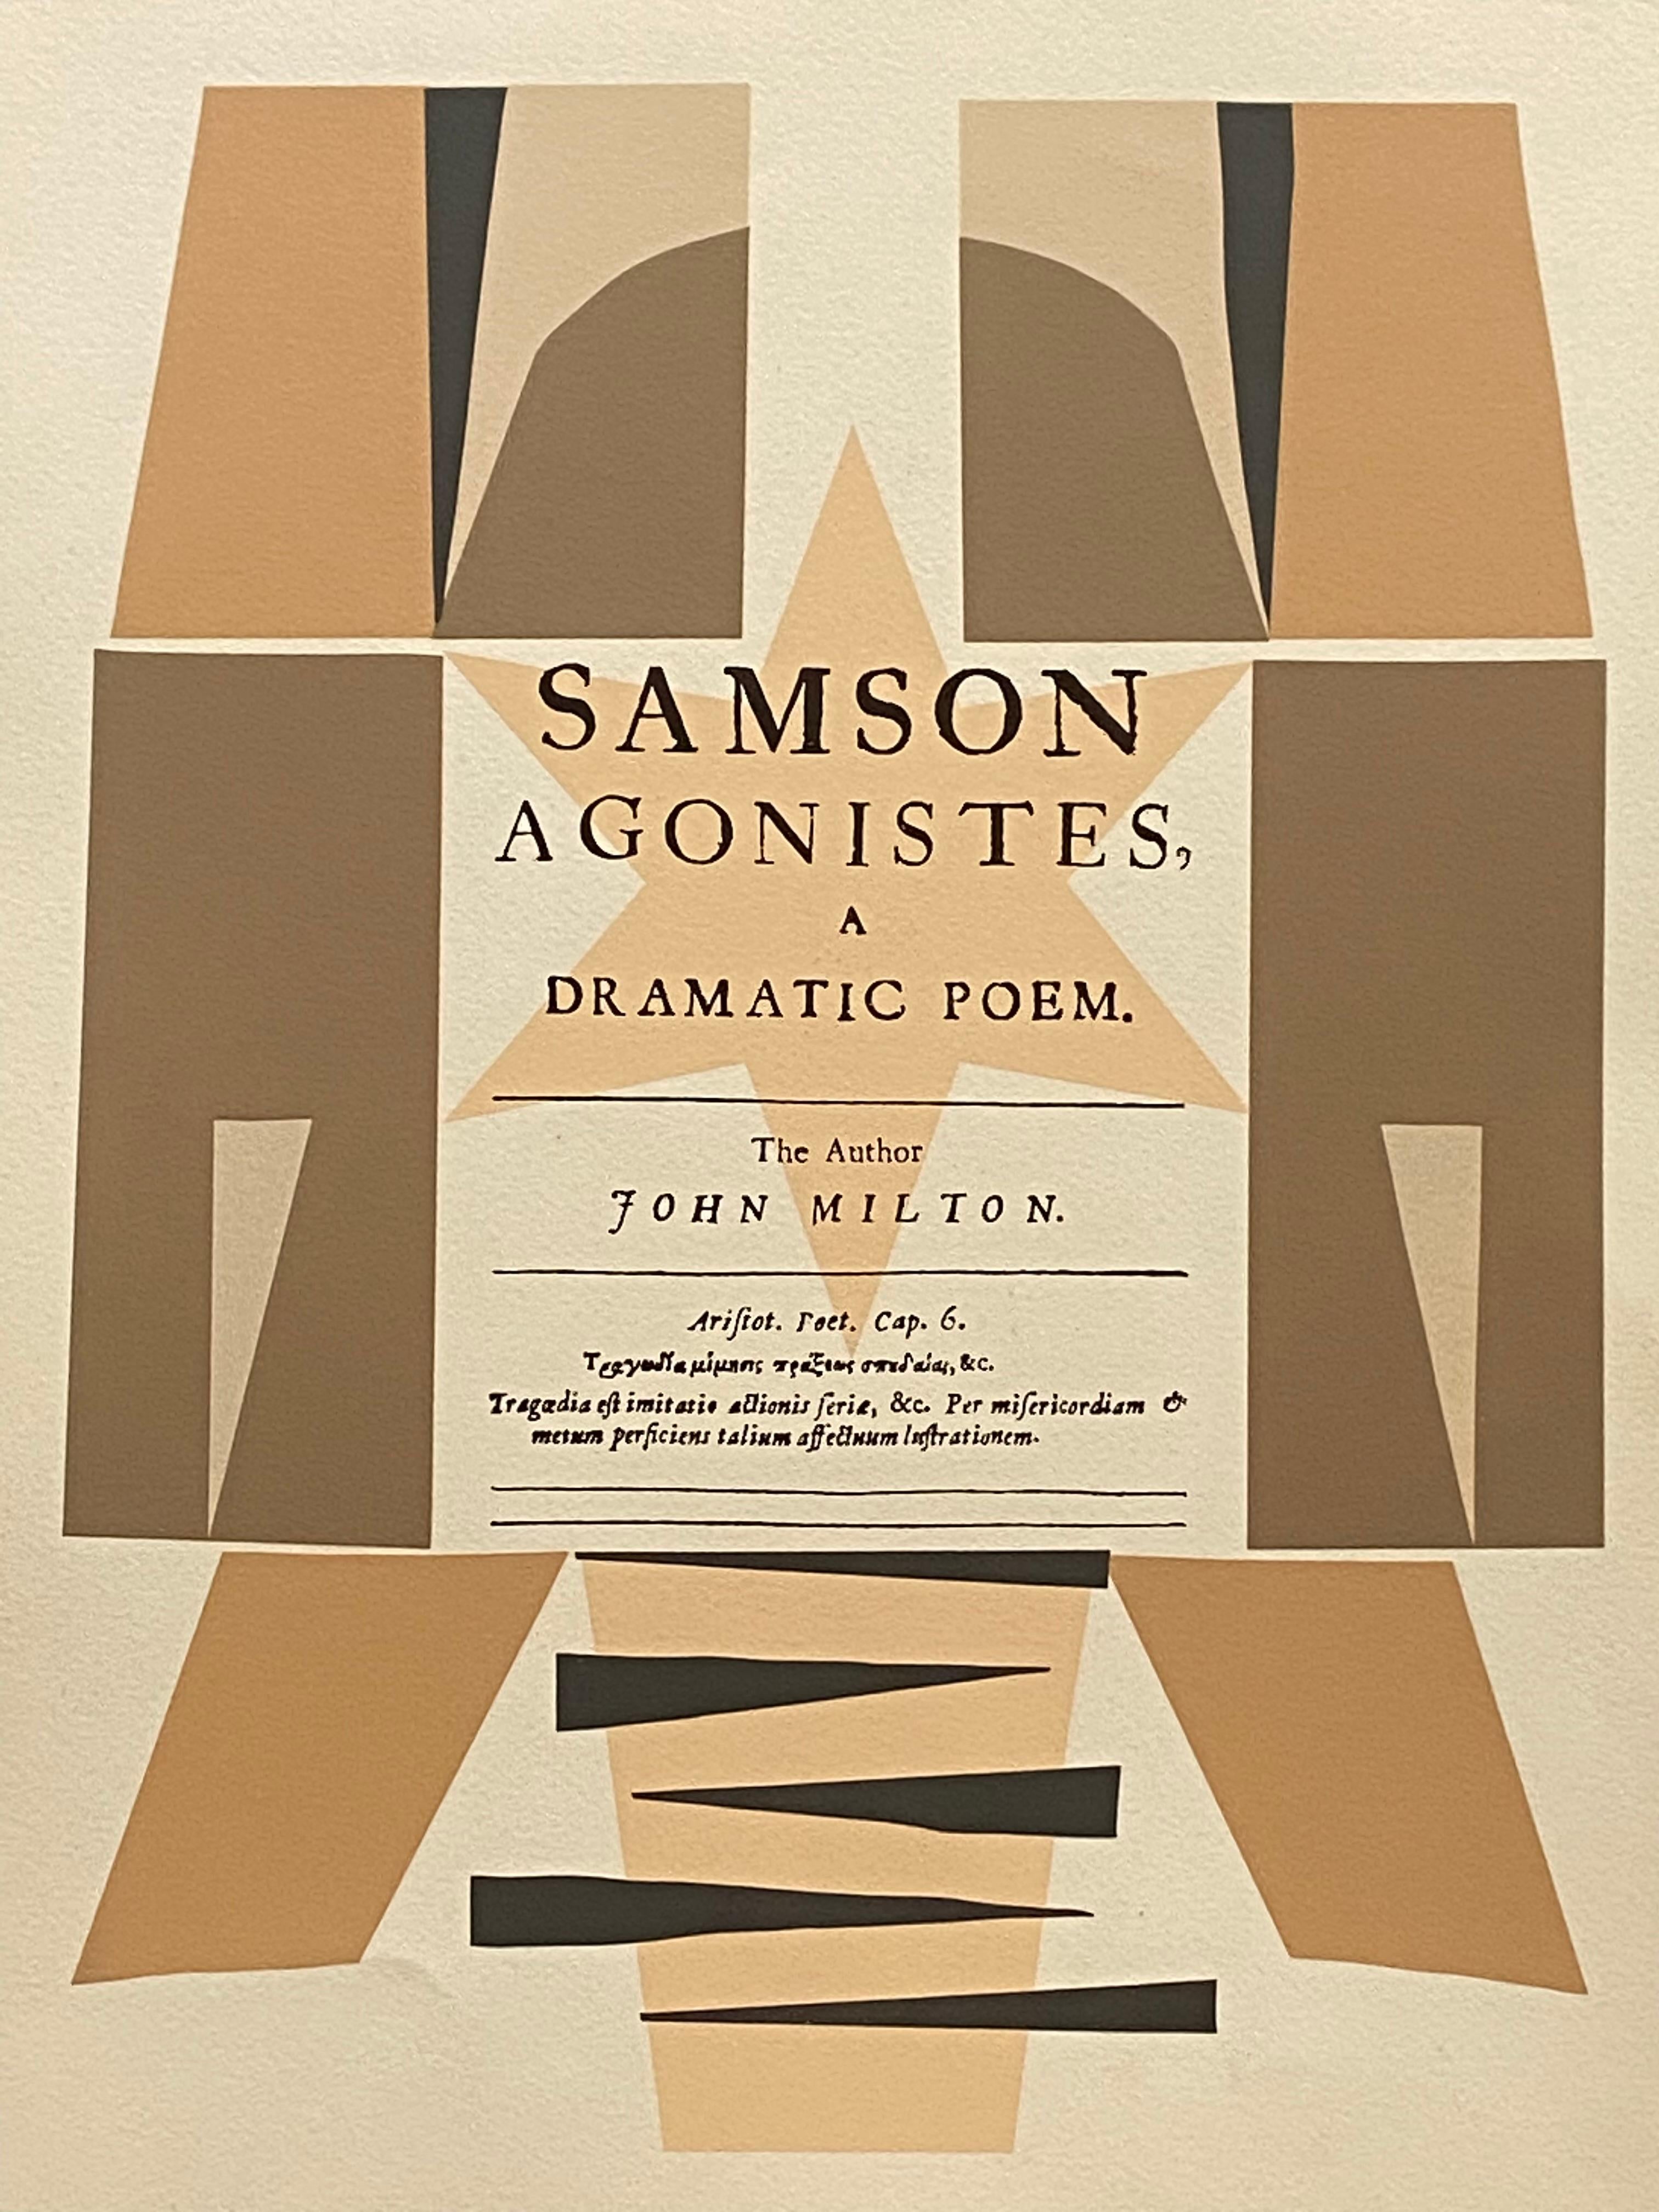 Robert Medley Abstract Print - Title Page: Samson Agonistes, a Dramatic Poem. The Author, John Milton